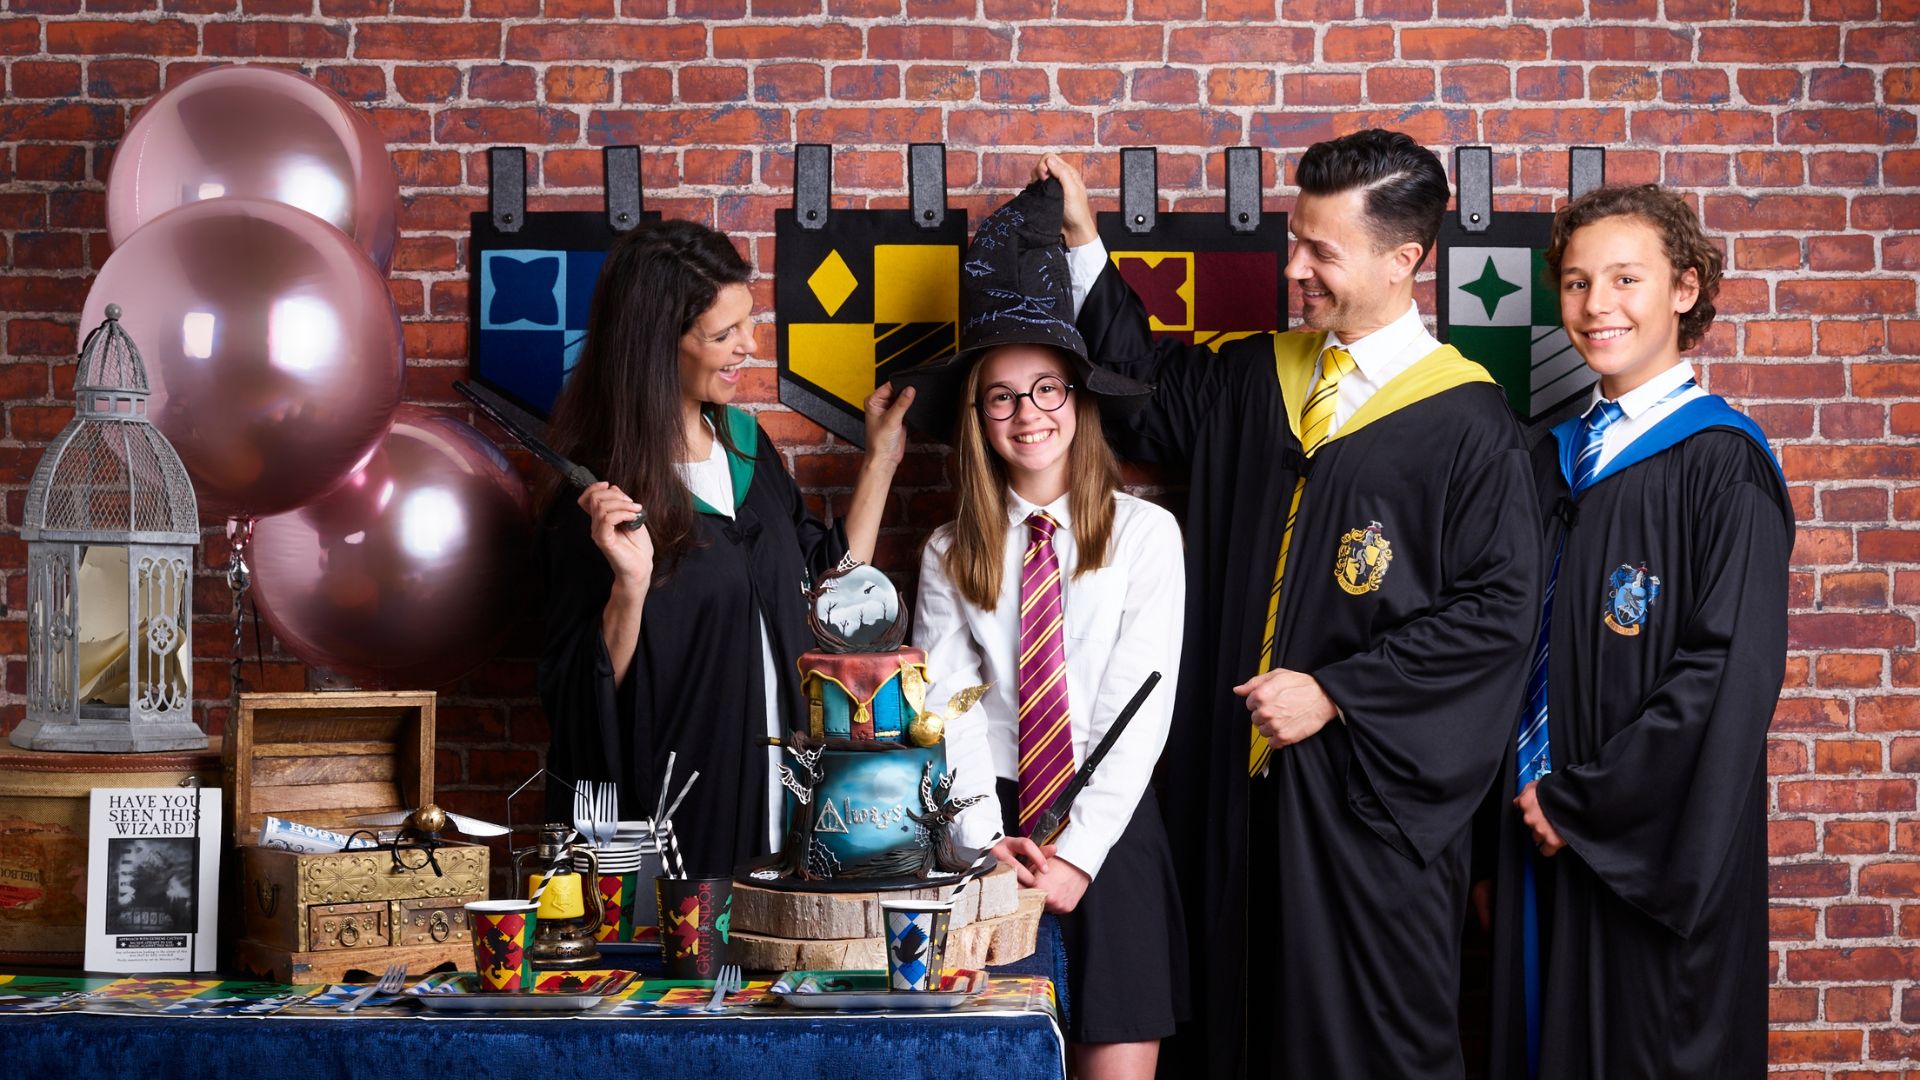 Harry Potter Themed Party Ideas - How to Throw a Harry Potter Party